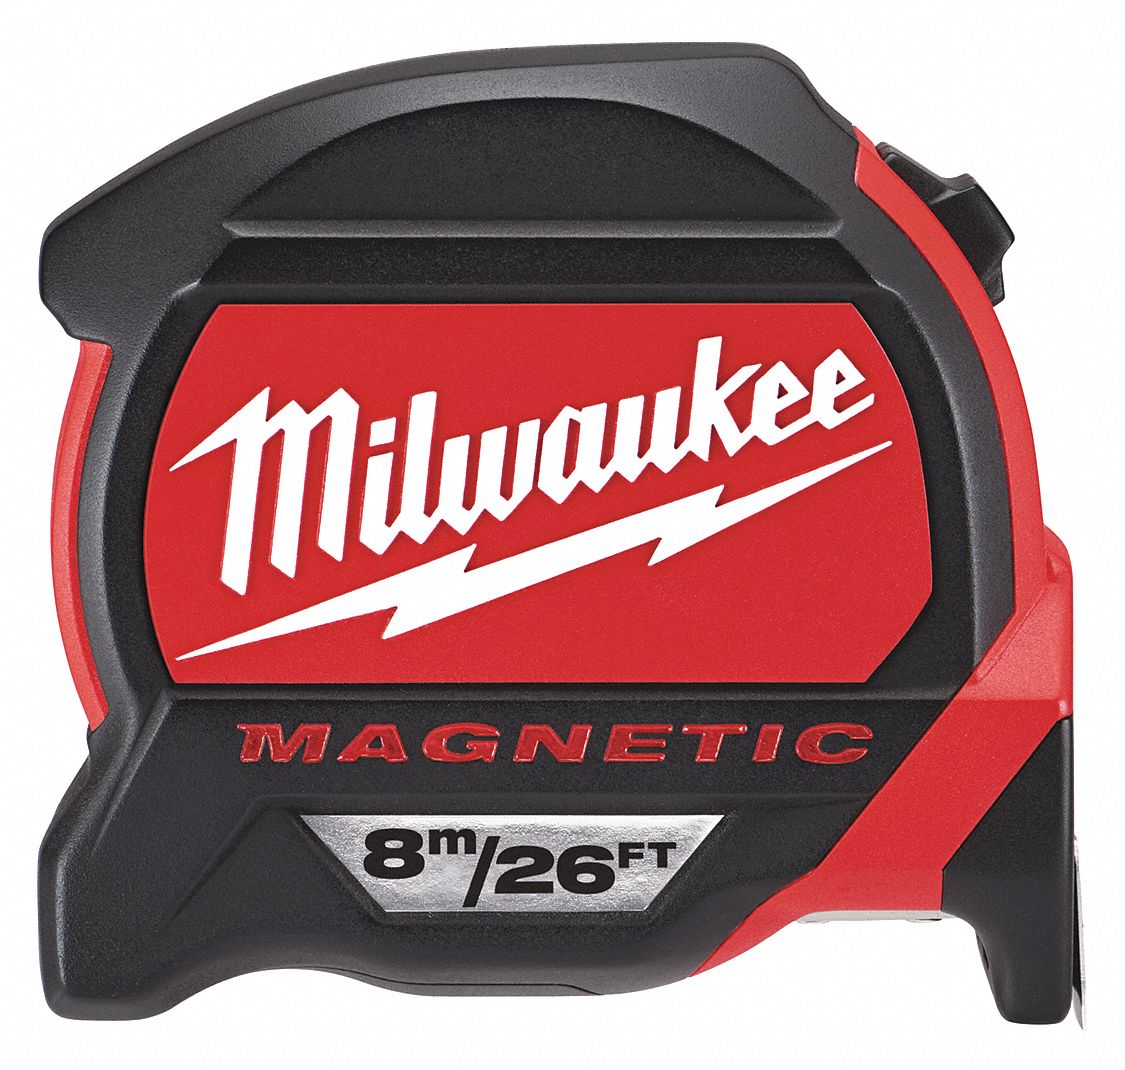 milwaukee-tip-tape-measure-26-ft-8m-blade-l-49nw10-48-22-7225